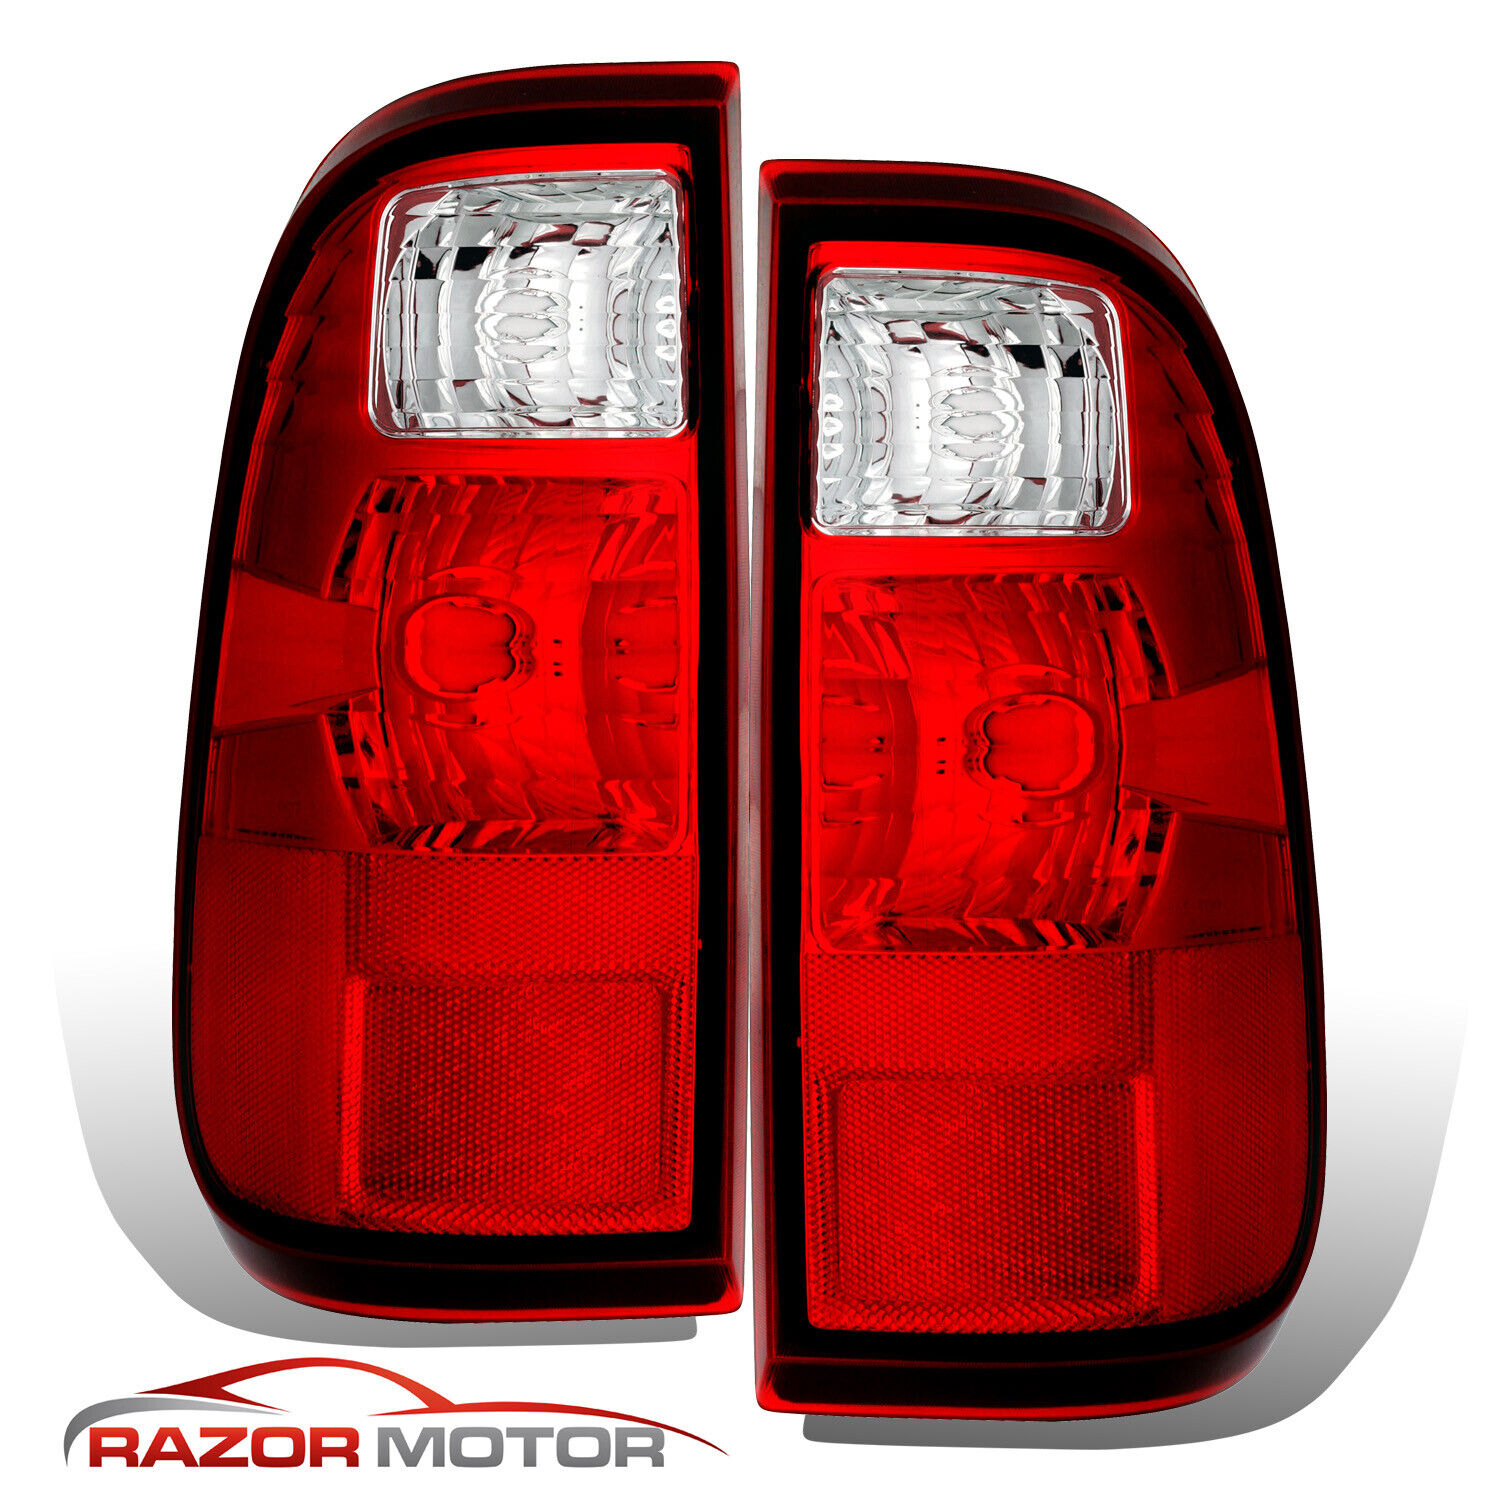 2008-2016 Replacement Tail Light Lamp Pair For Ford F250 F350 Super Duty Truck